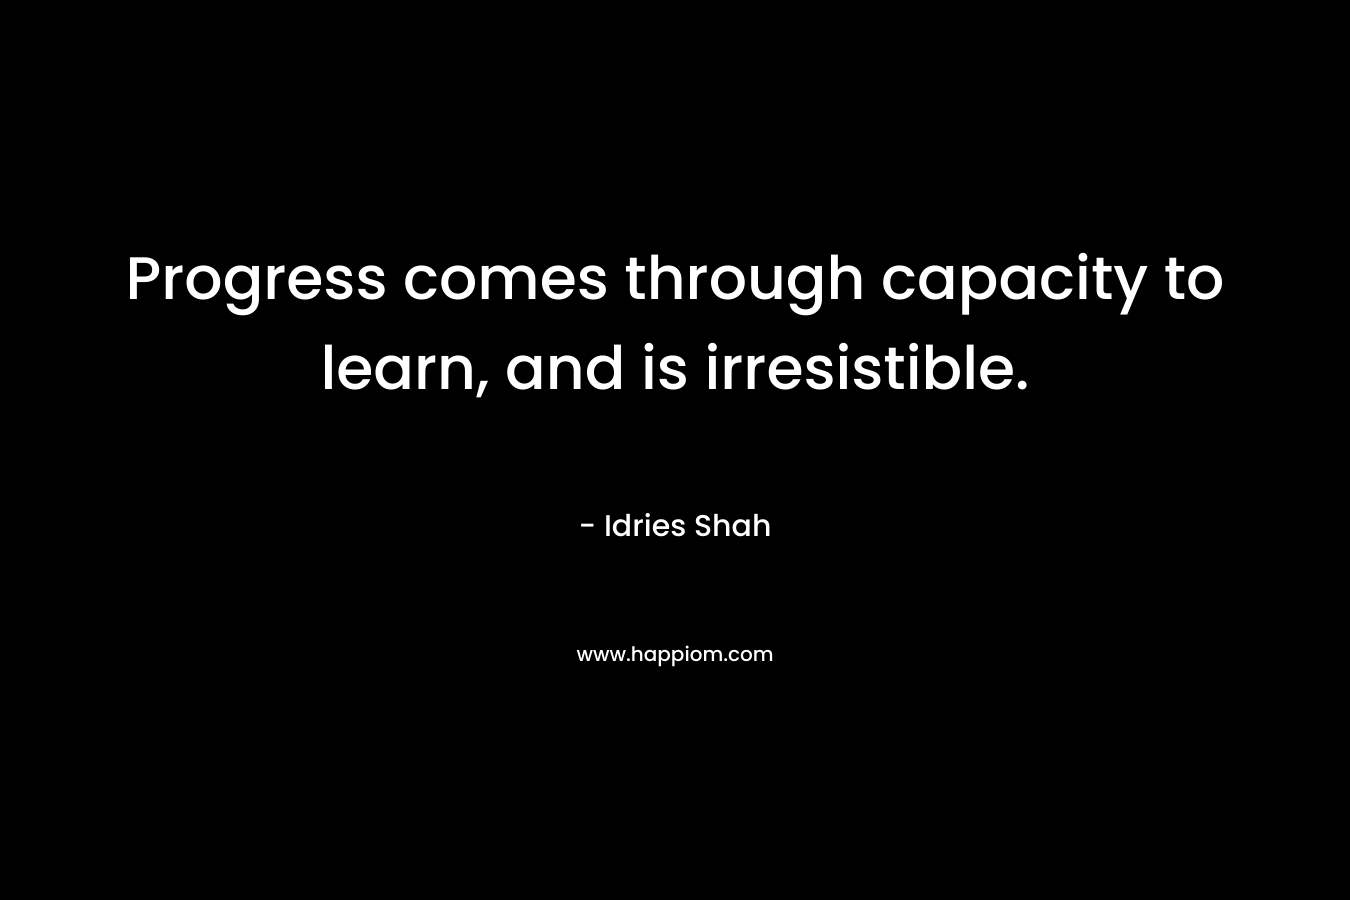 Progress comes through capacity to learn, and is irresistible. – Idries Shah